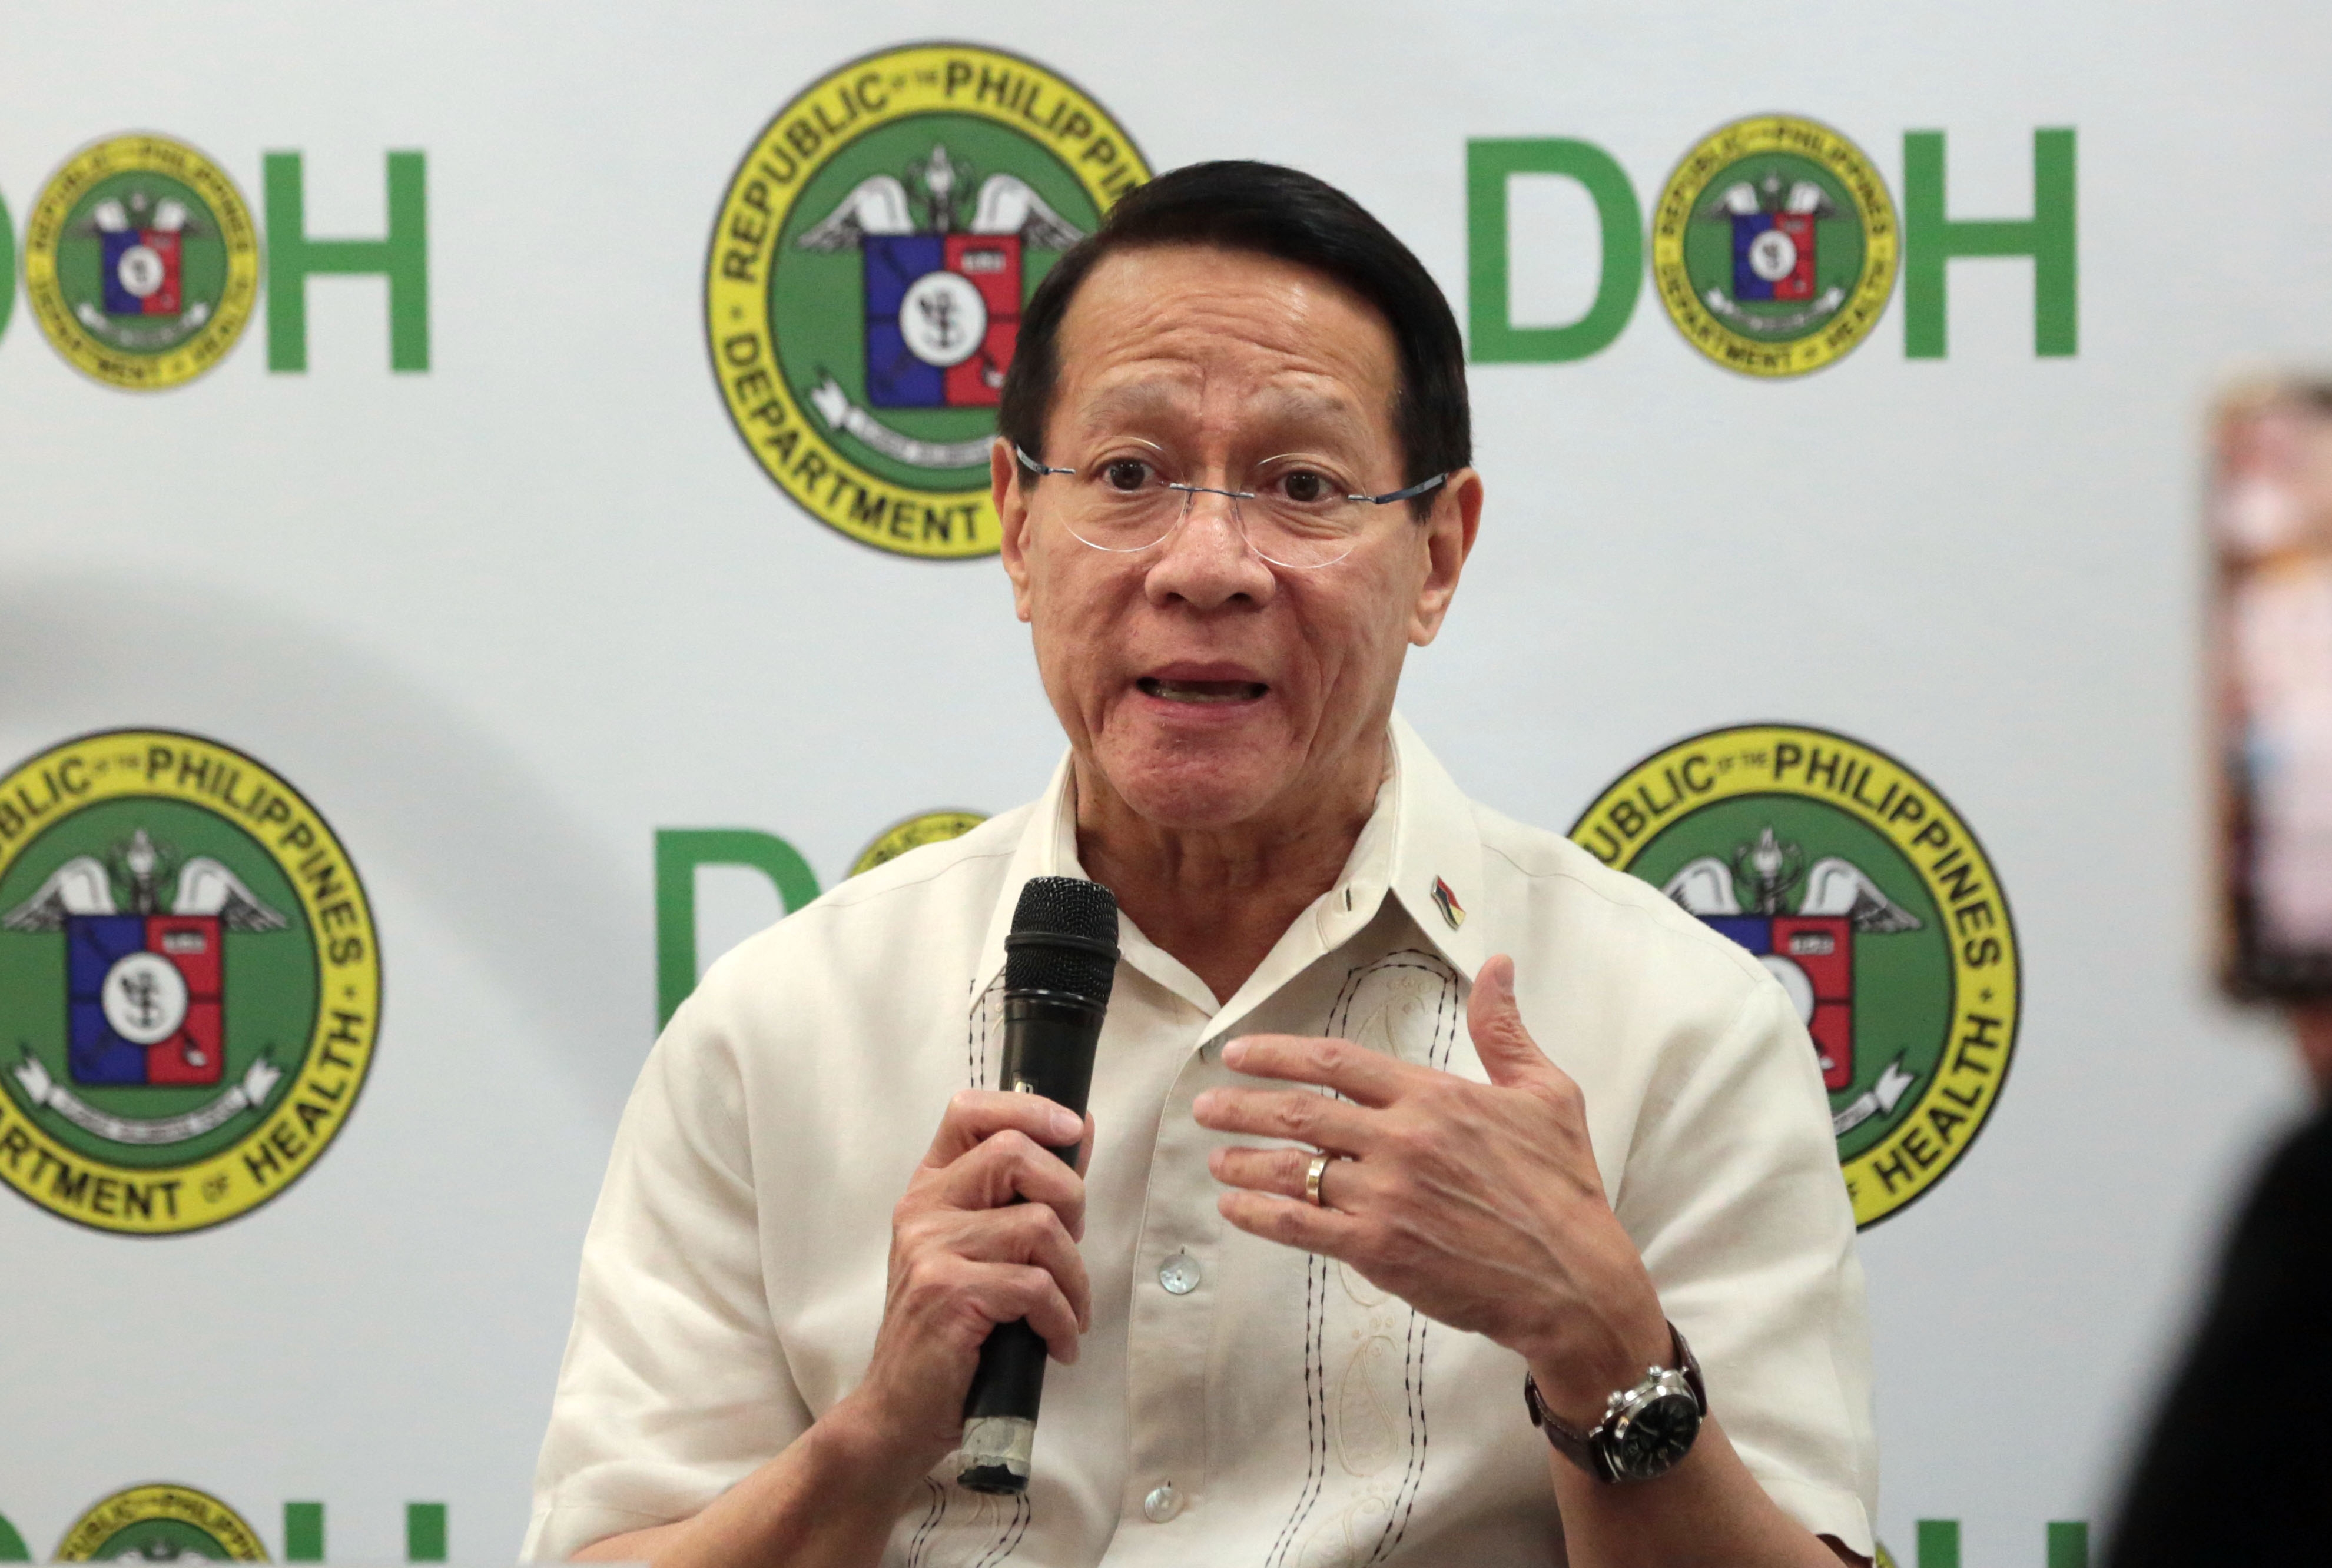 duque Ombudsman asked to issue subpoena for Duque, brother for PhilHealth rental mess